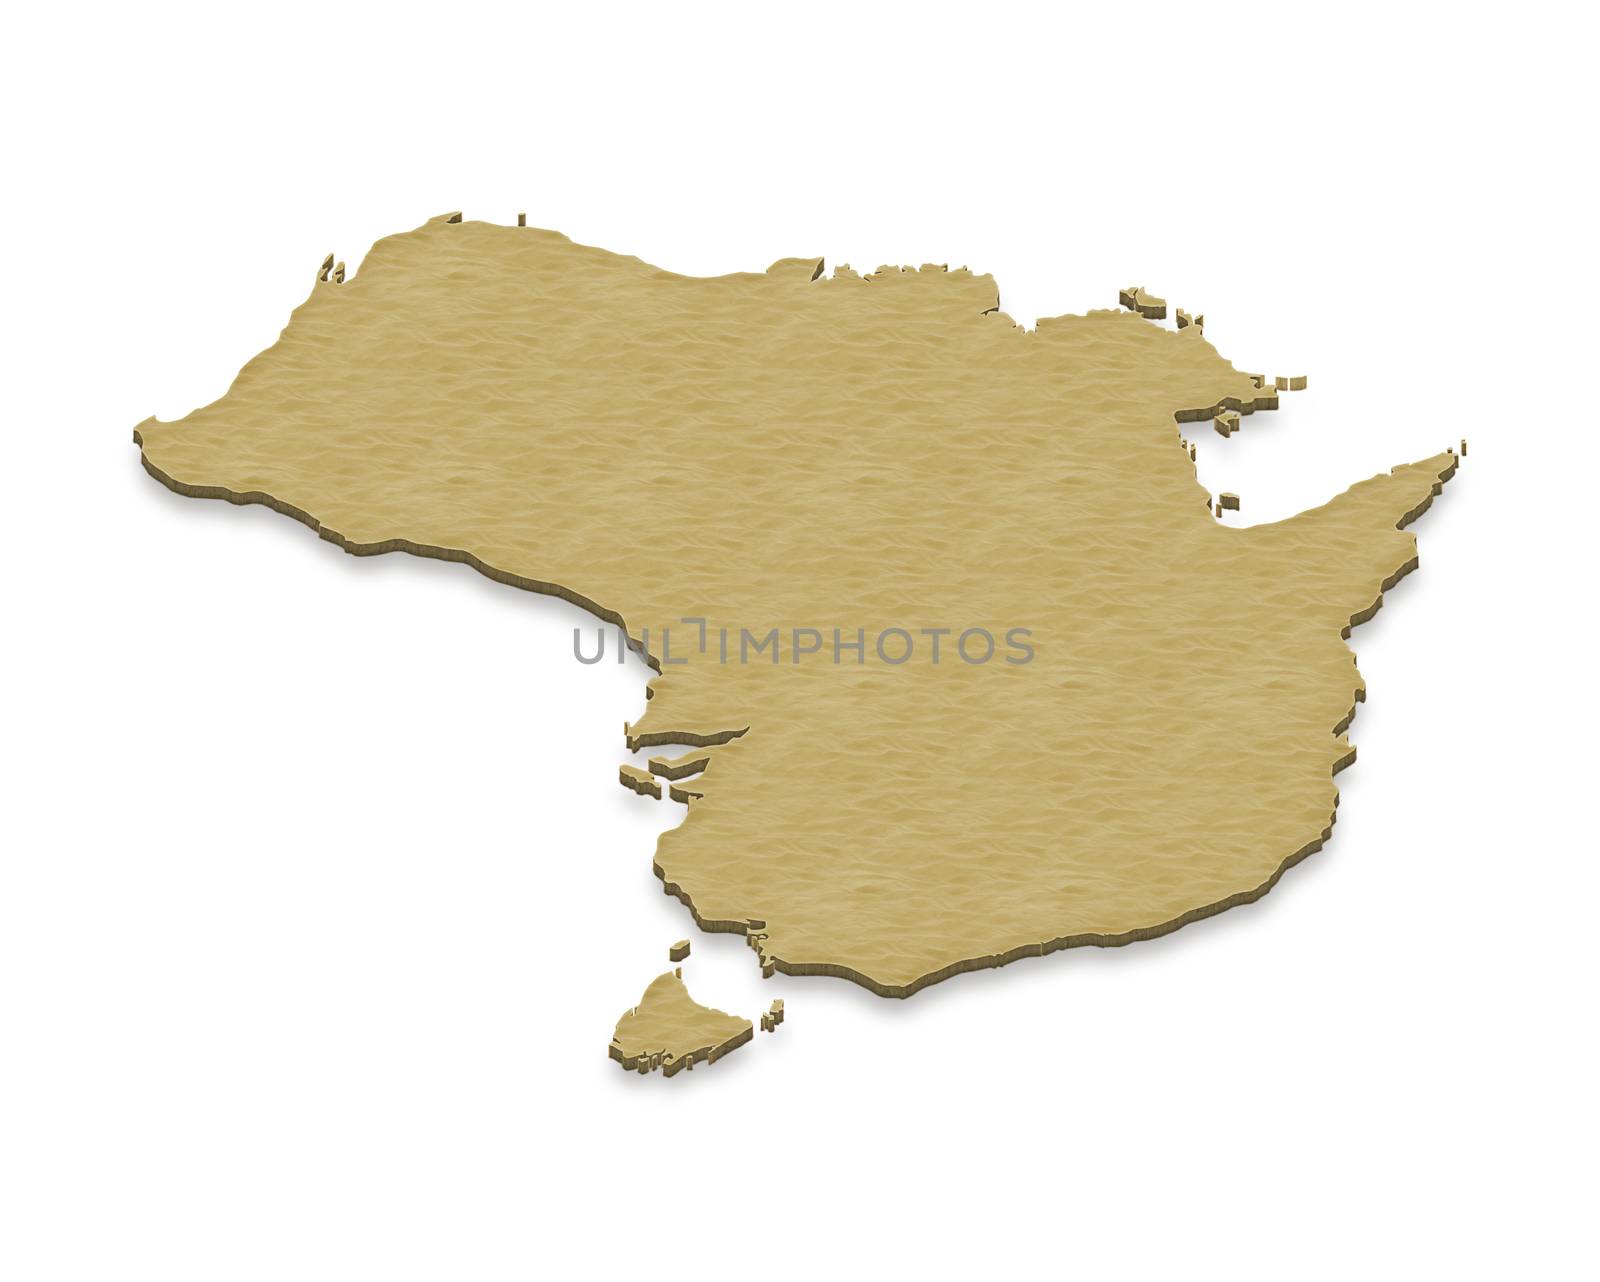 Illustration of a sand ground map of Australia on isolated background. Left 3D isometric projection.